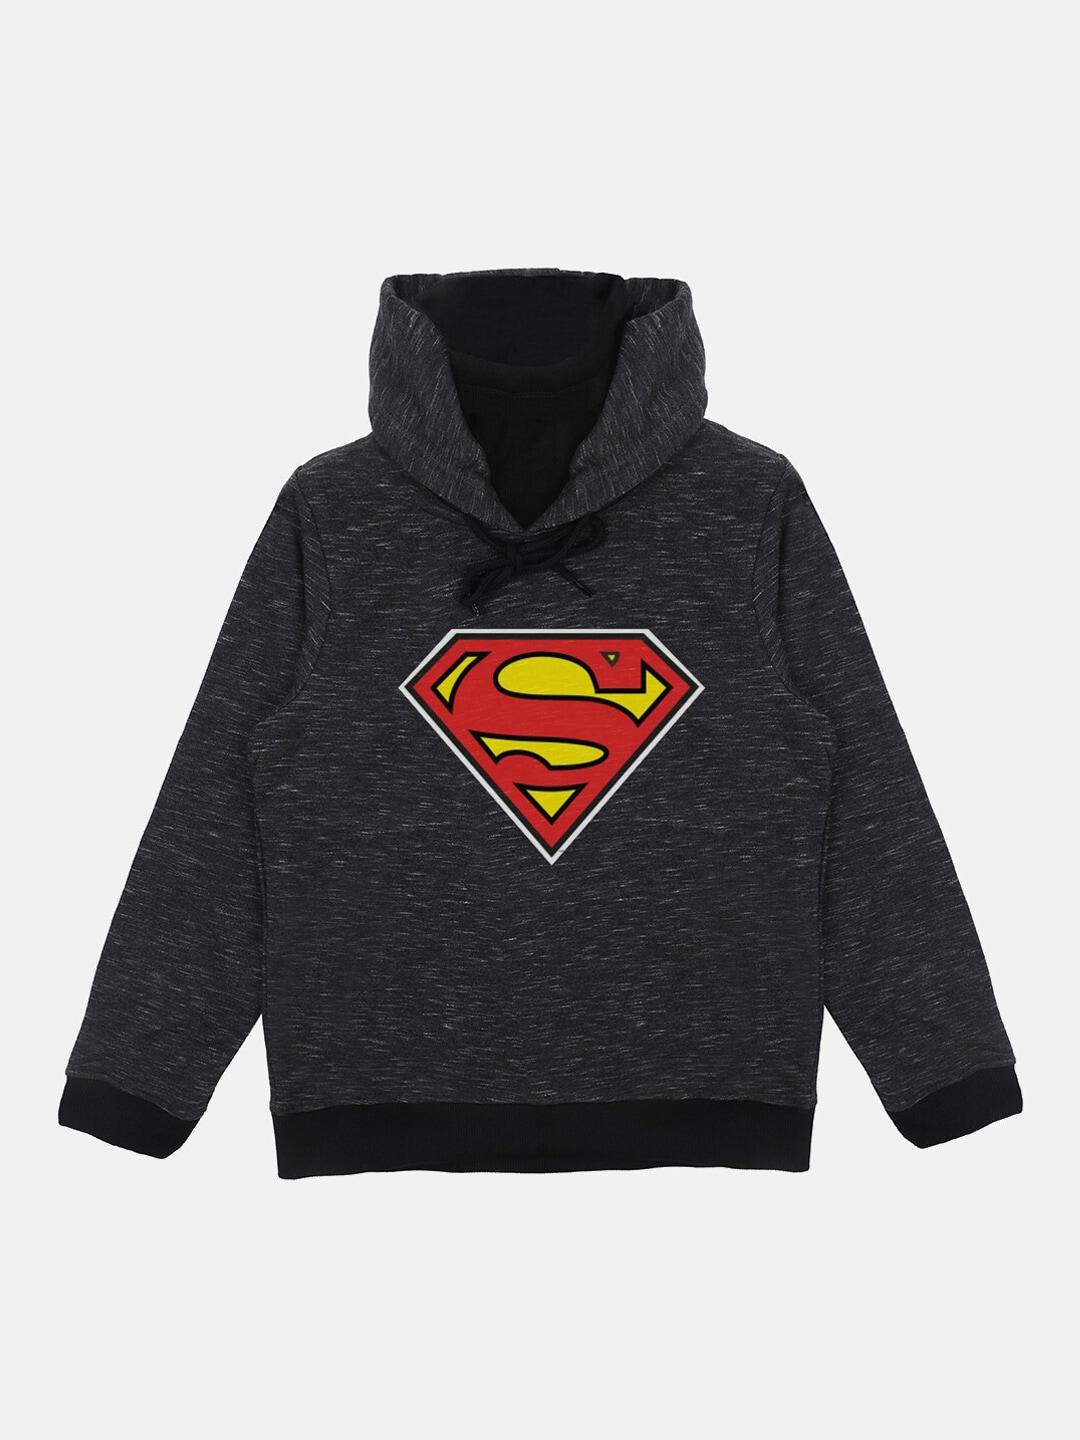 superman-boys-charcoal-printed-hooded-sweatshirt-with-attached-face-covering